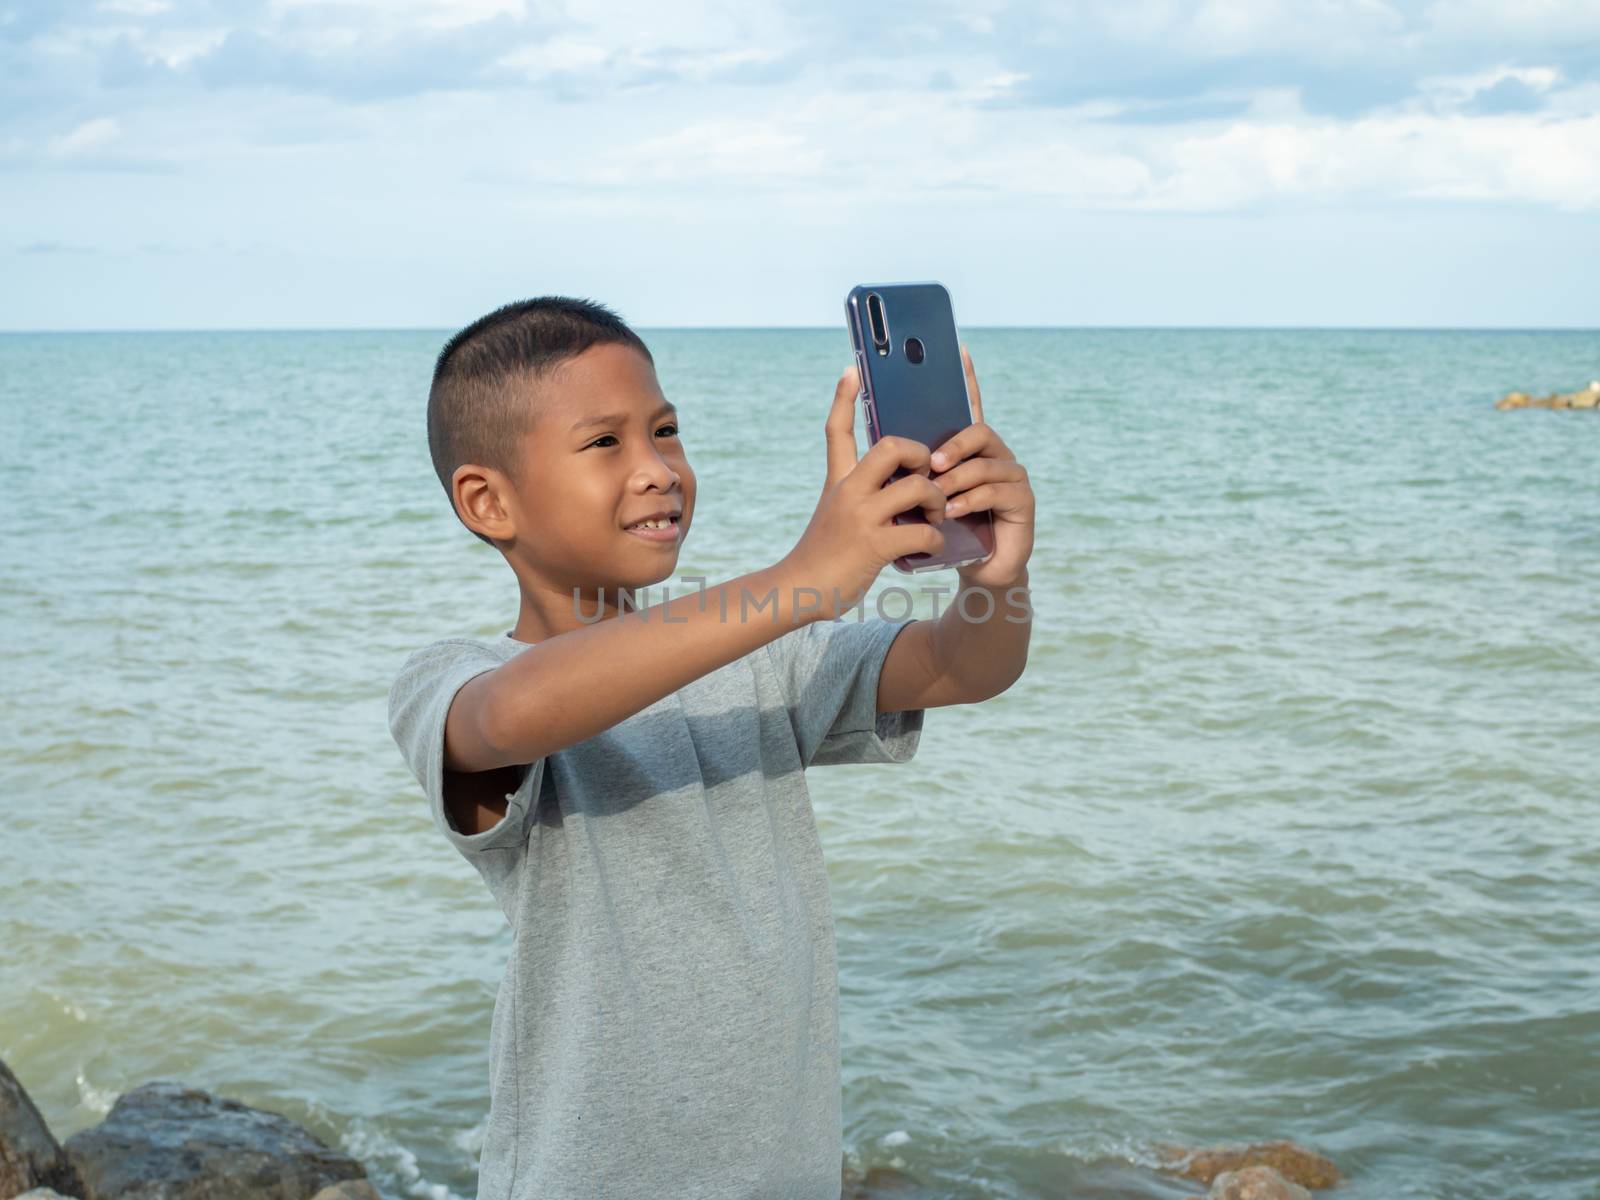 A boy using a phone to take a selfie on a sea background